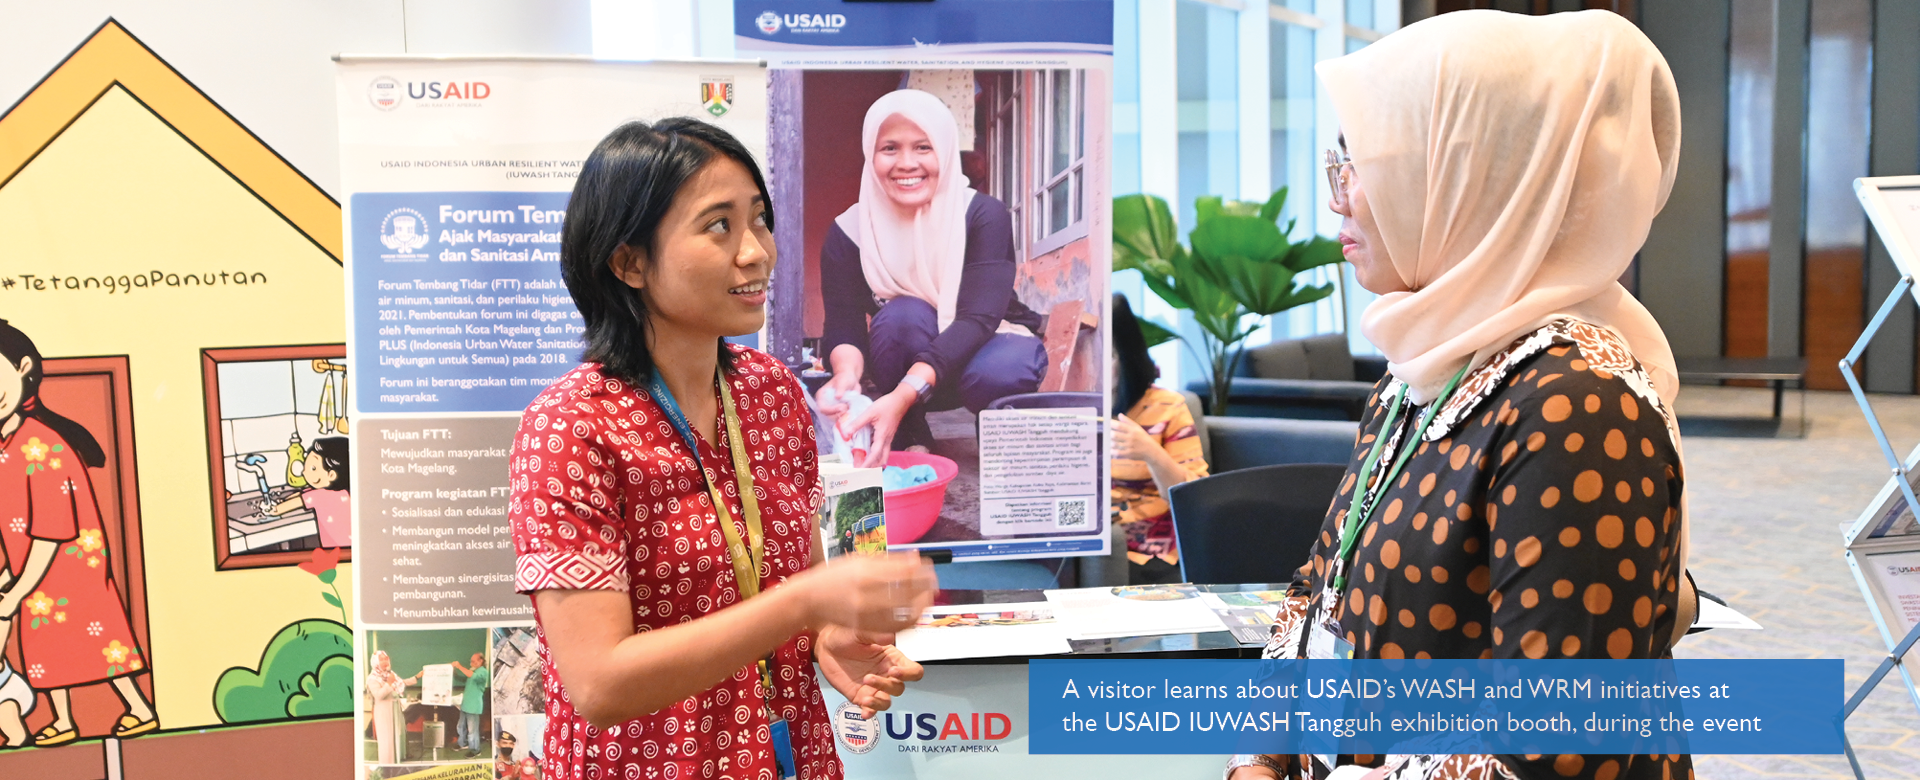 A visitor learns about USAID’s WASH and WRM initiatives at the USAID IUWASH Tangguh exhibition booth, during the event